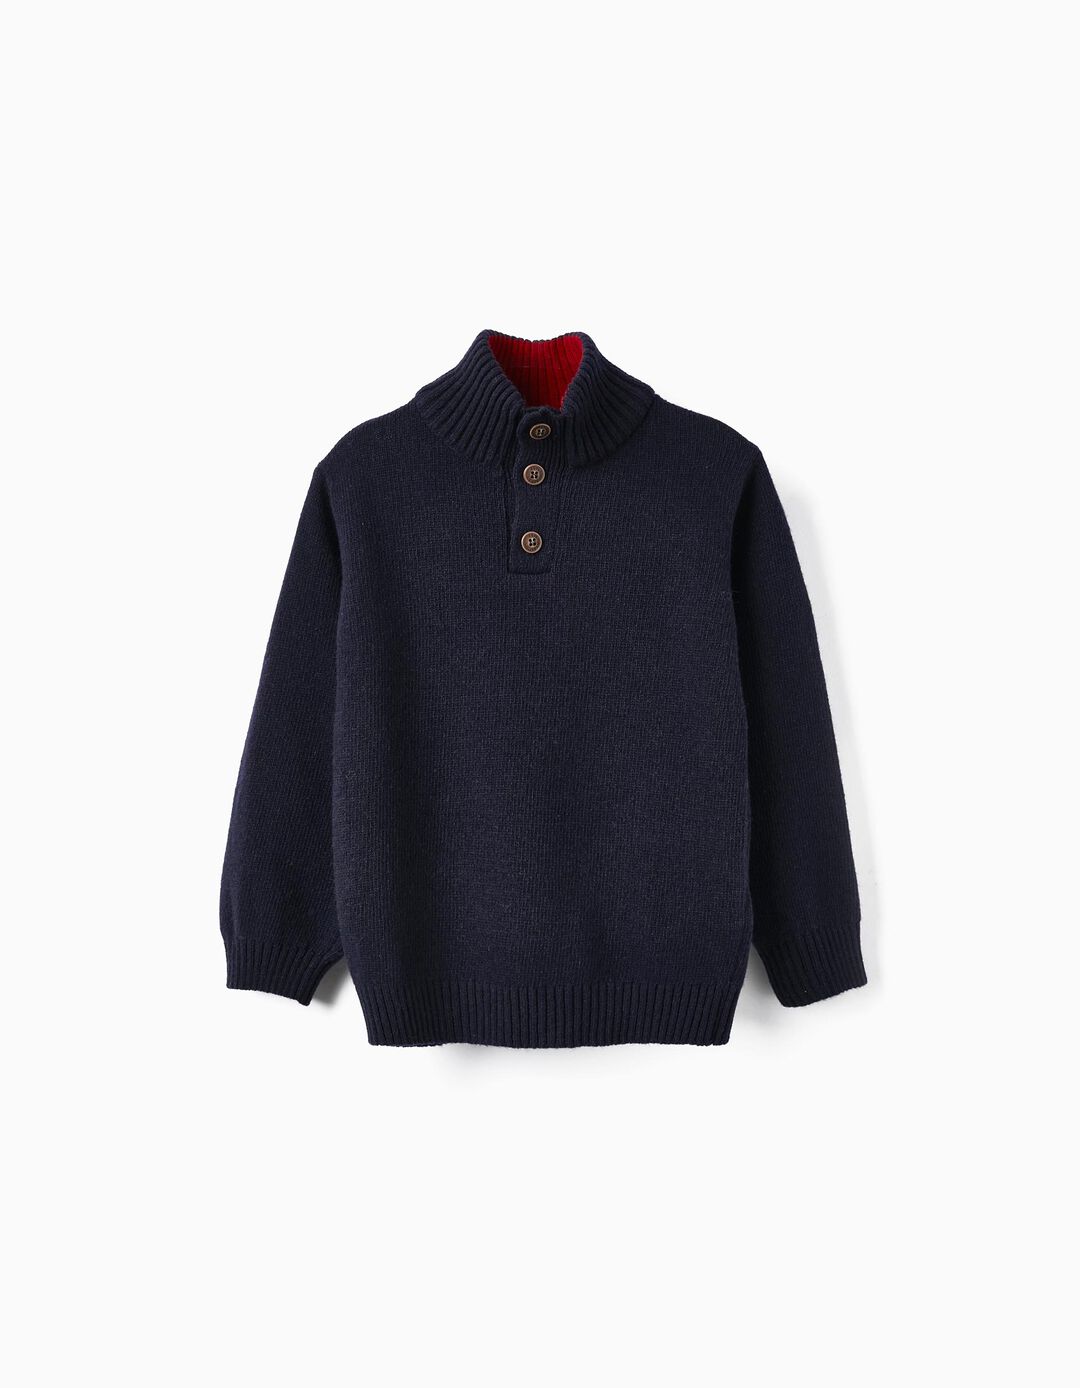 Knitted Jumper with Elbow Patches for Boys, Dark Blue